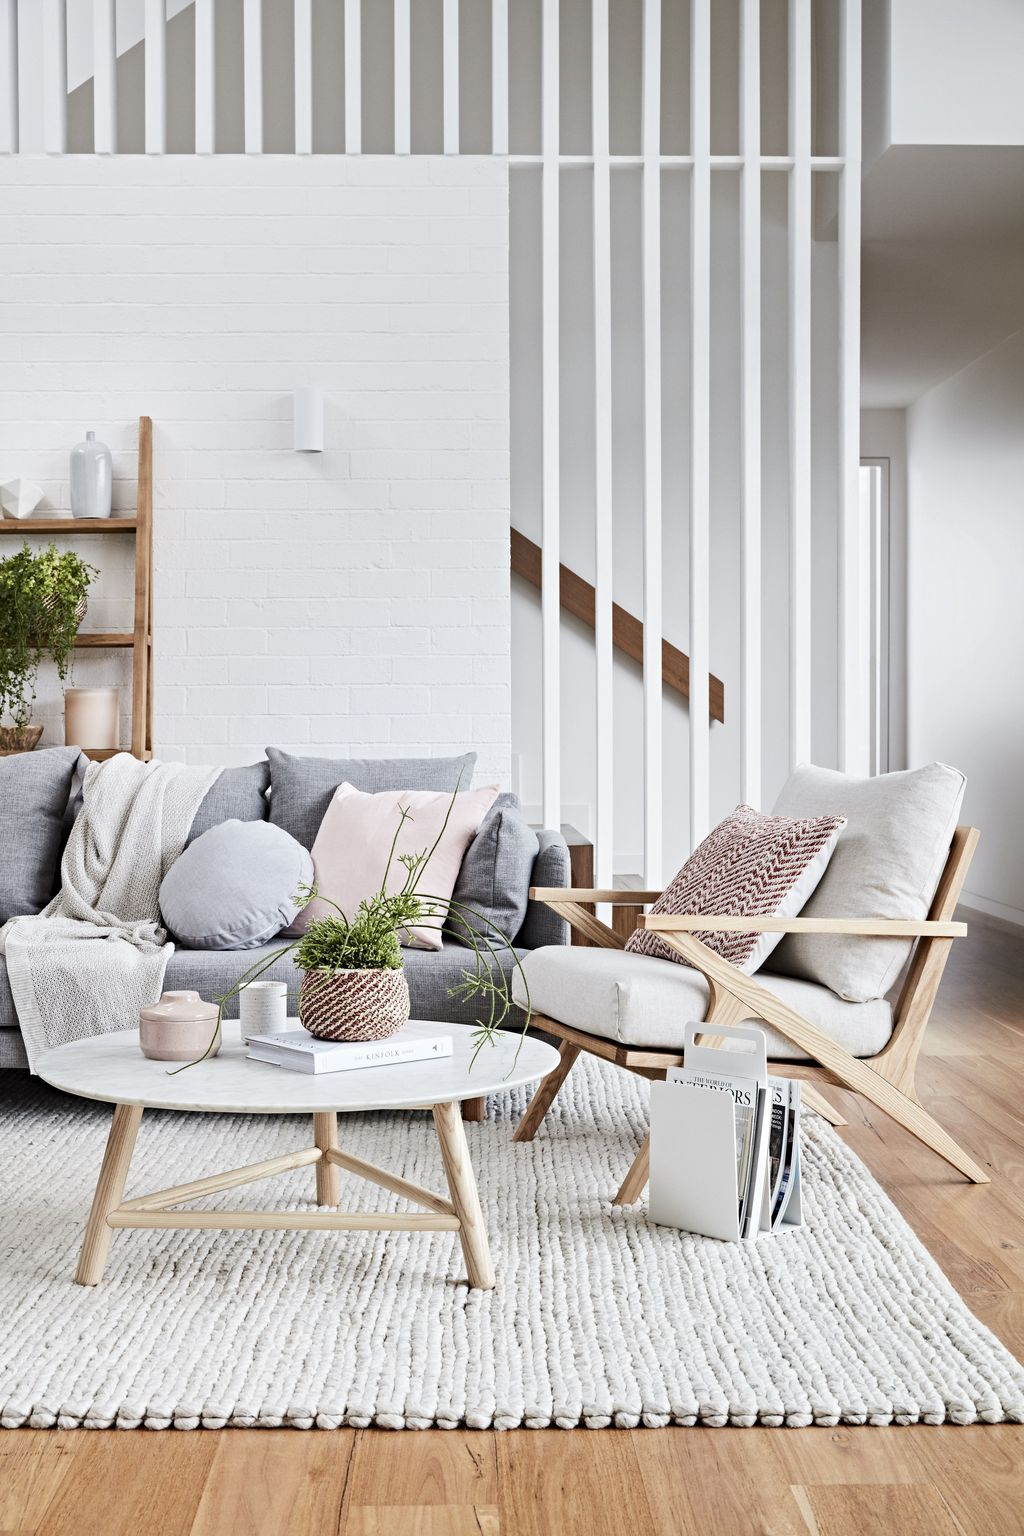 Scandinavian Living Room Design: 7 Key Features For A Minimalistic And Cozy Space